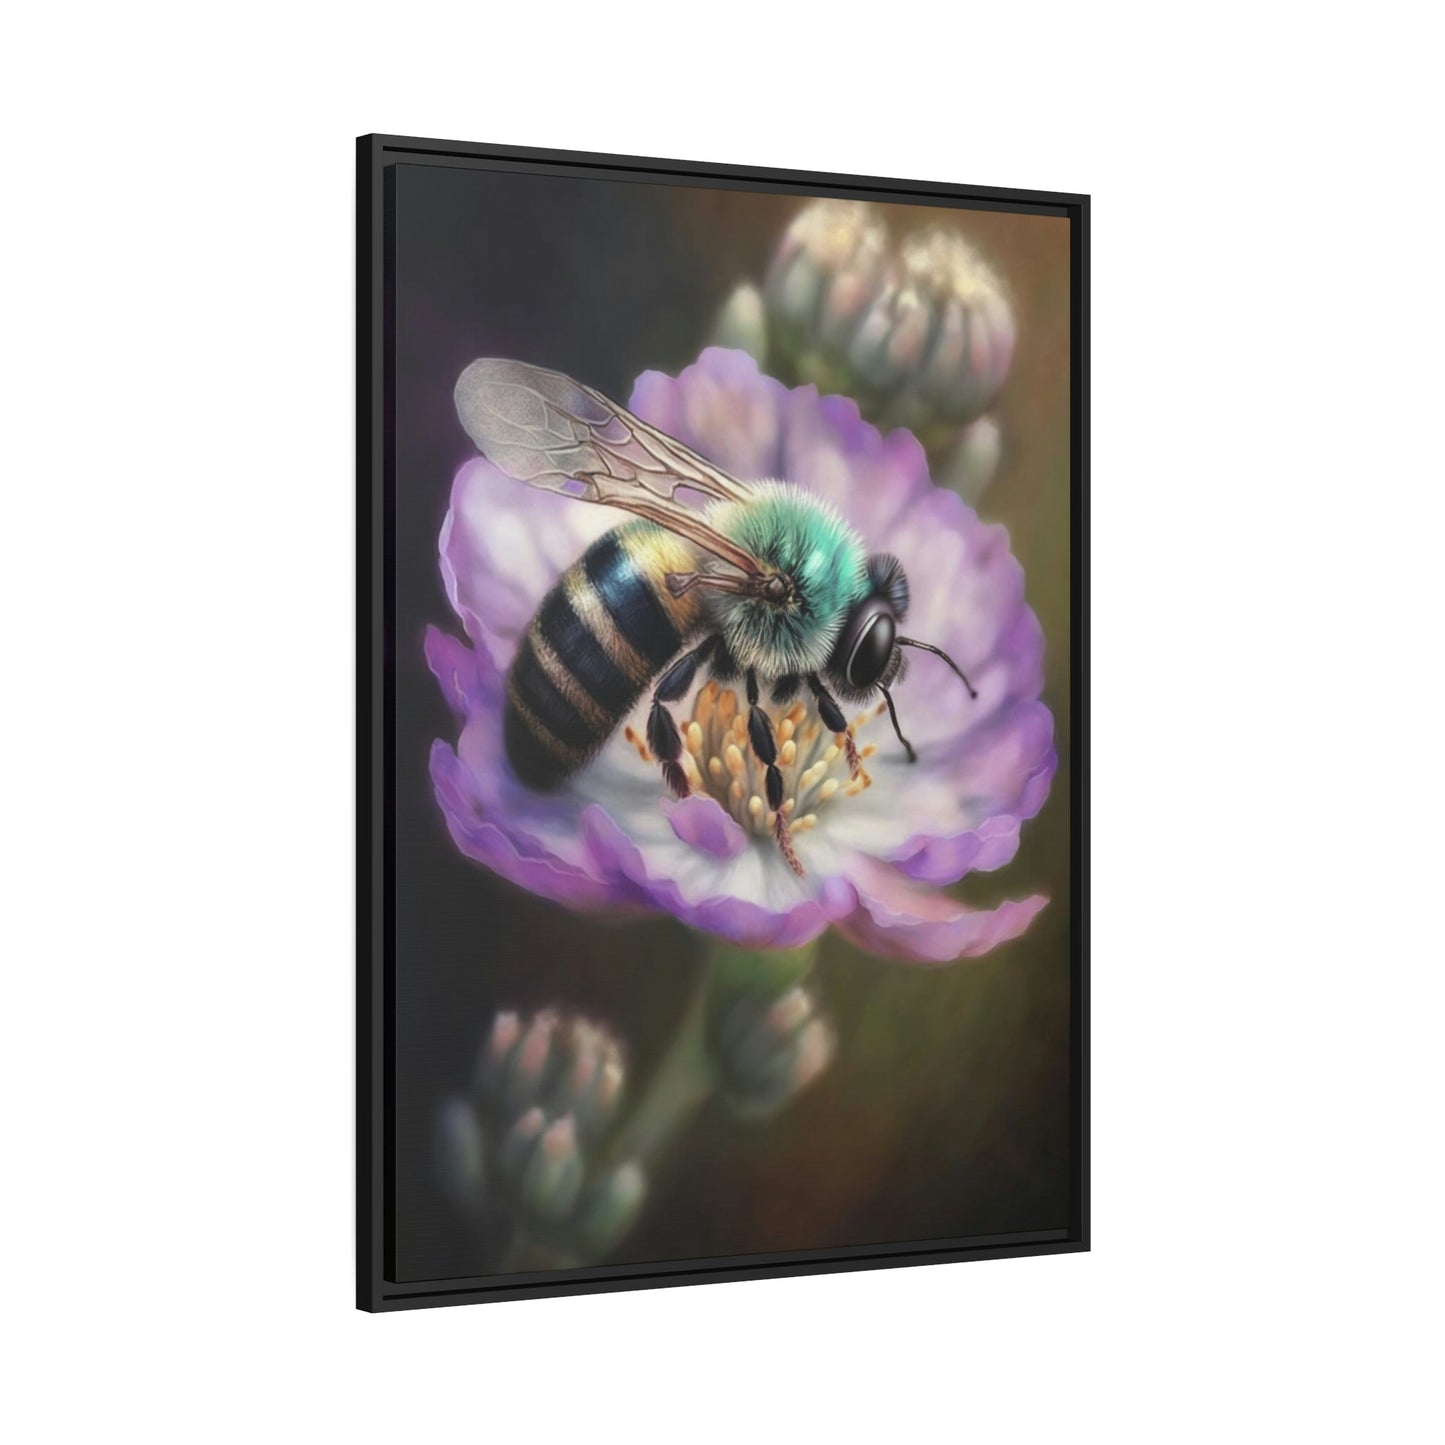 A Tiny Miracle: A Framed Poster & Canvas Print of a Bee Collecting Pollen on a Flower